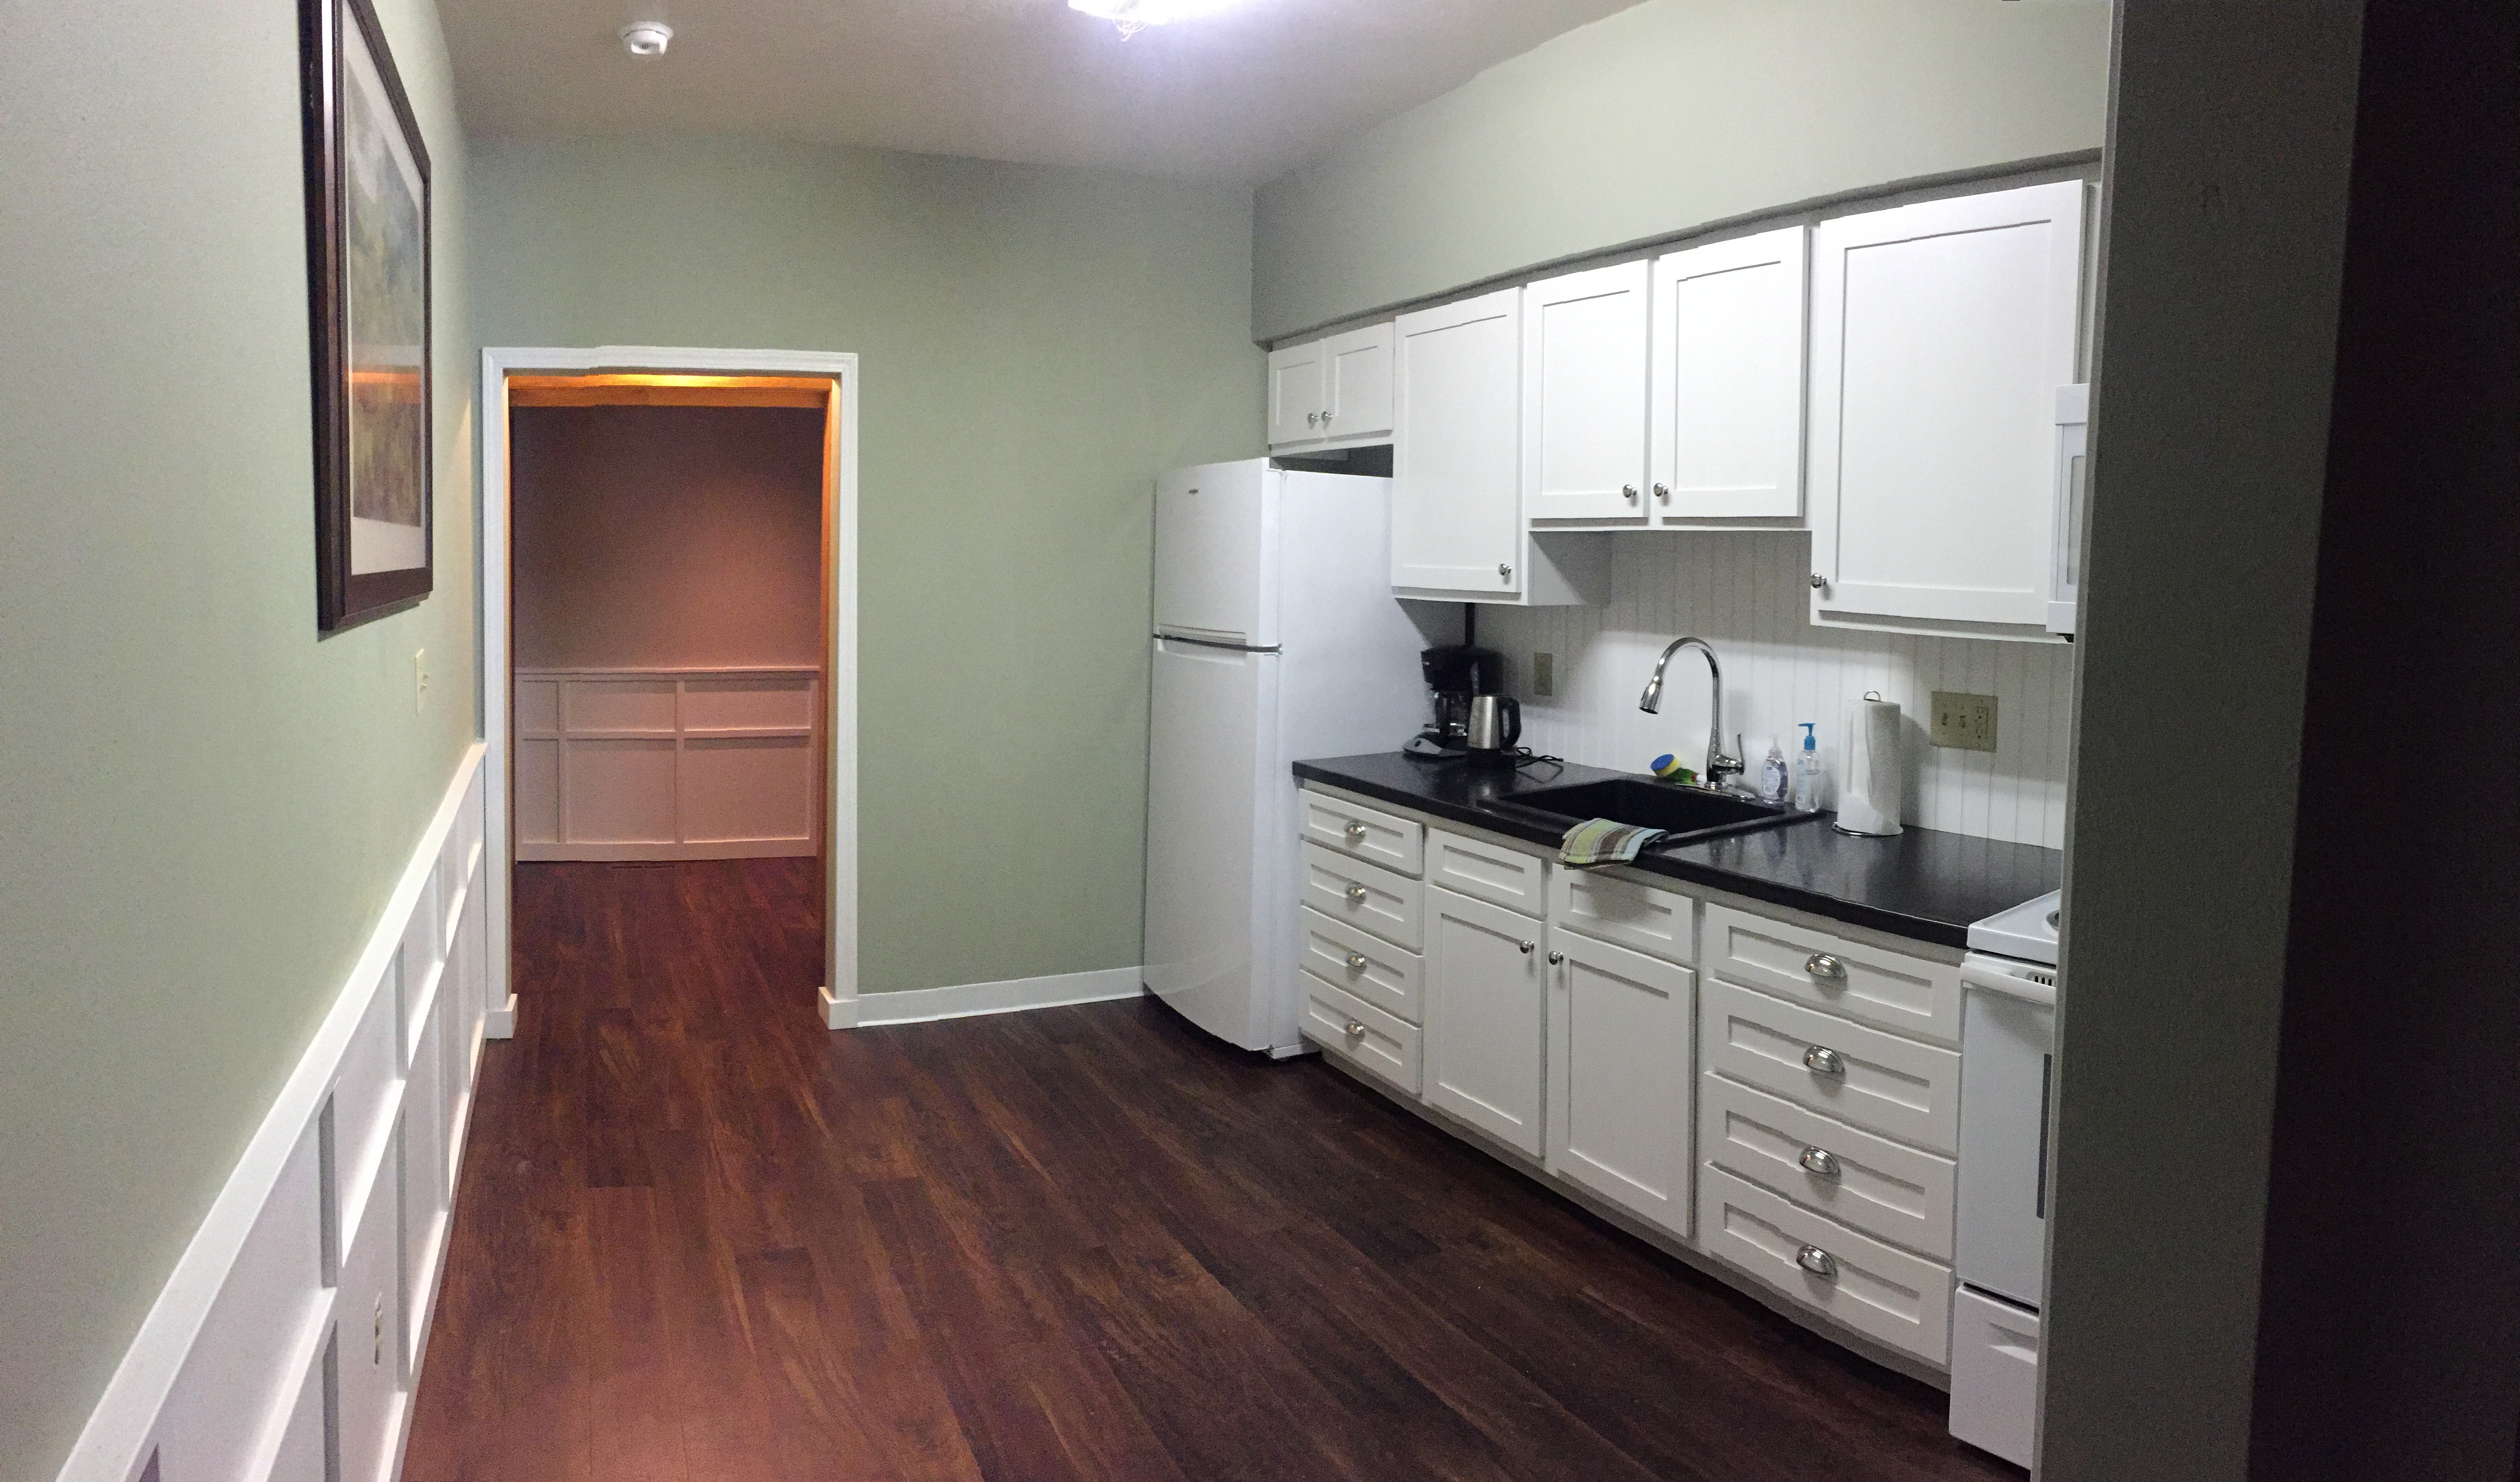 Office/Kitchen Remodel at St. Mark